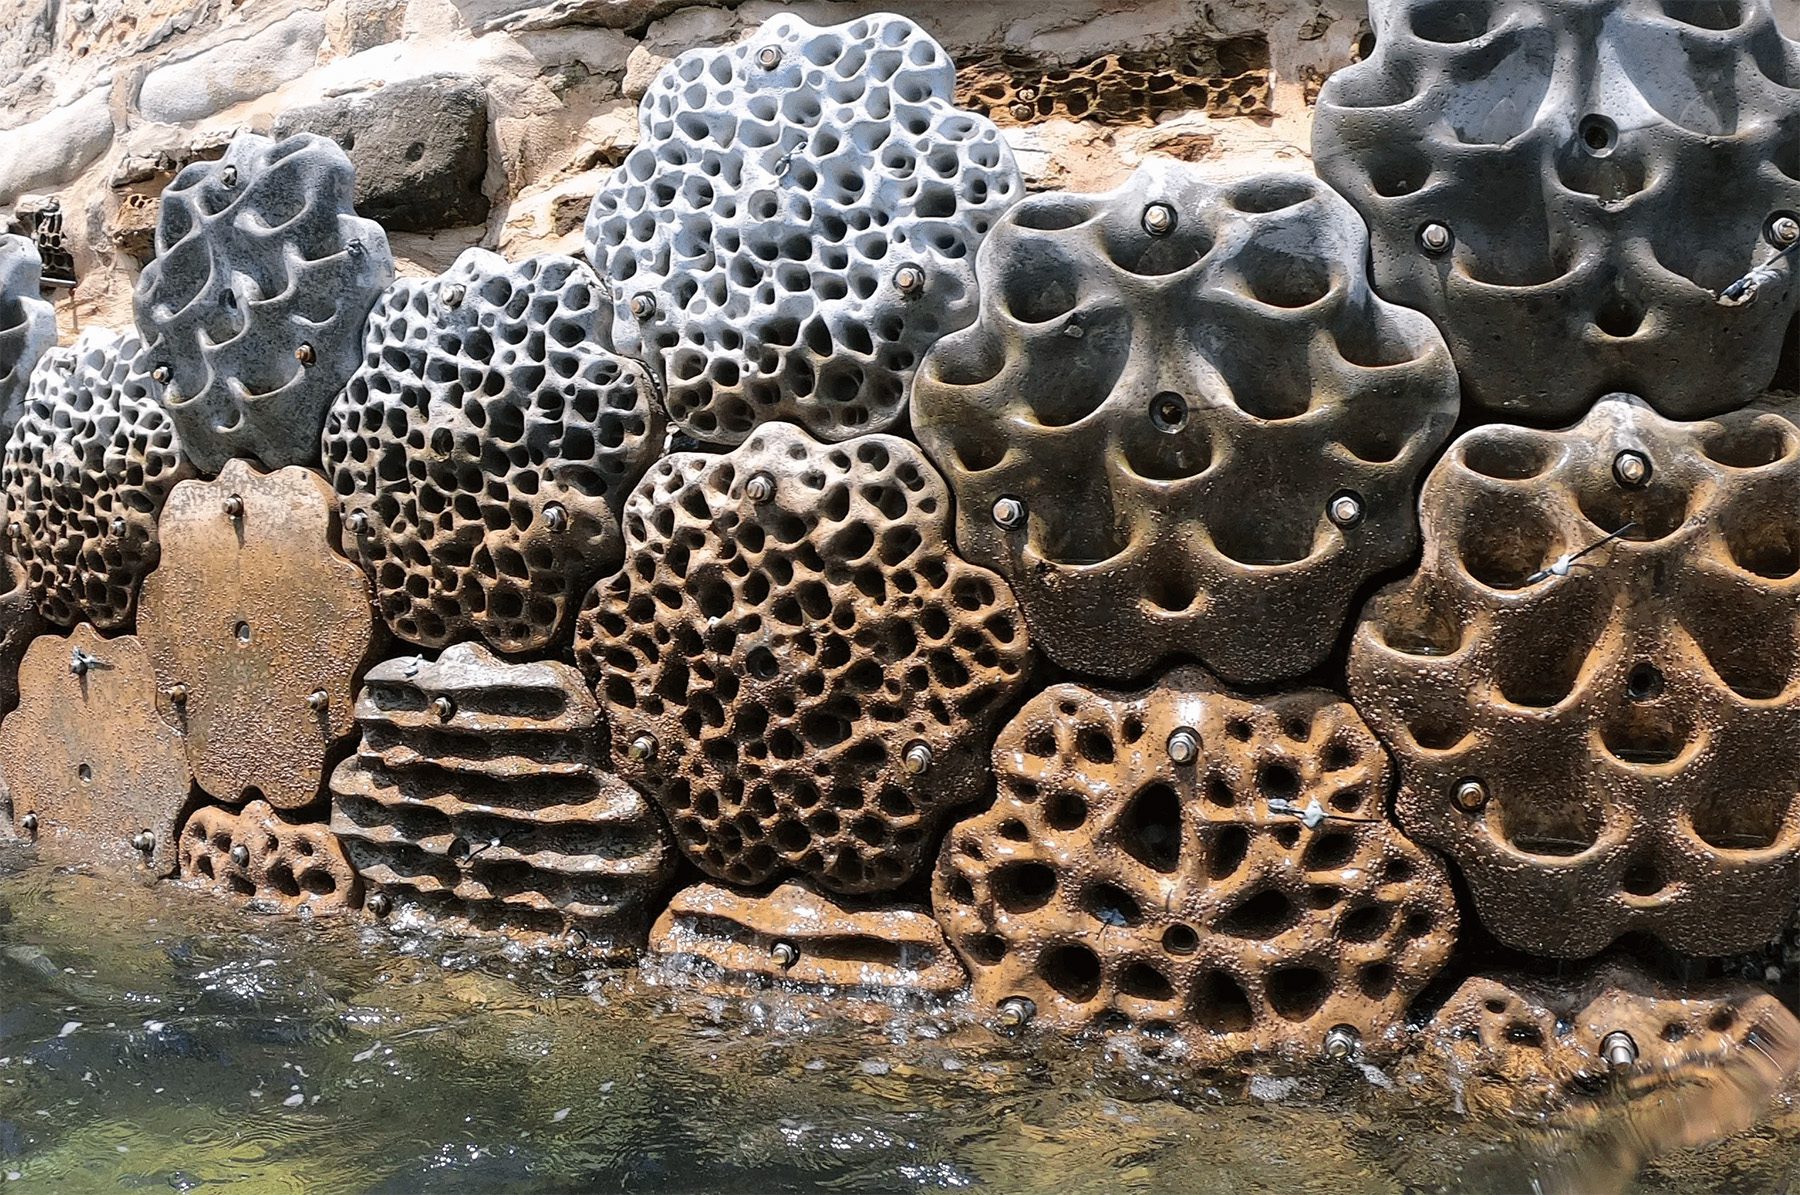 Artificial structures on sea defences